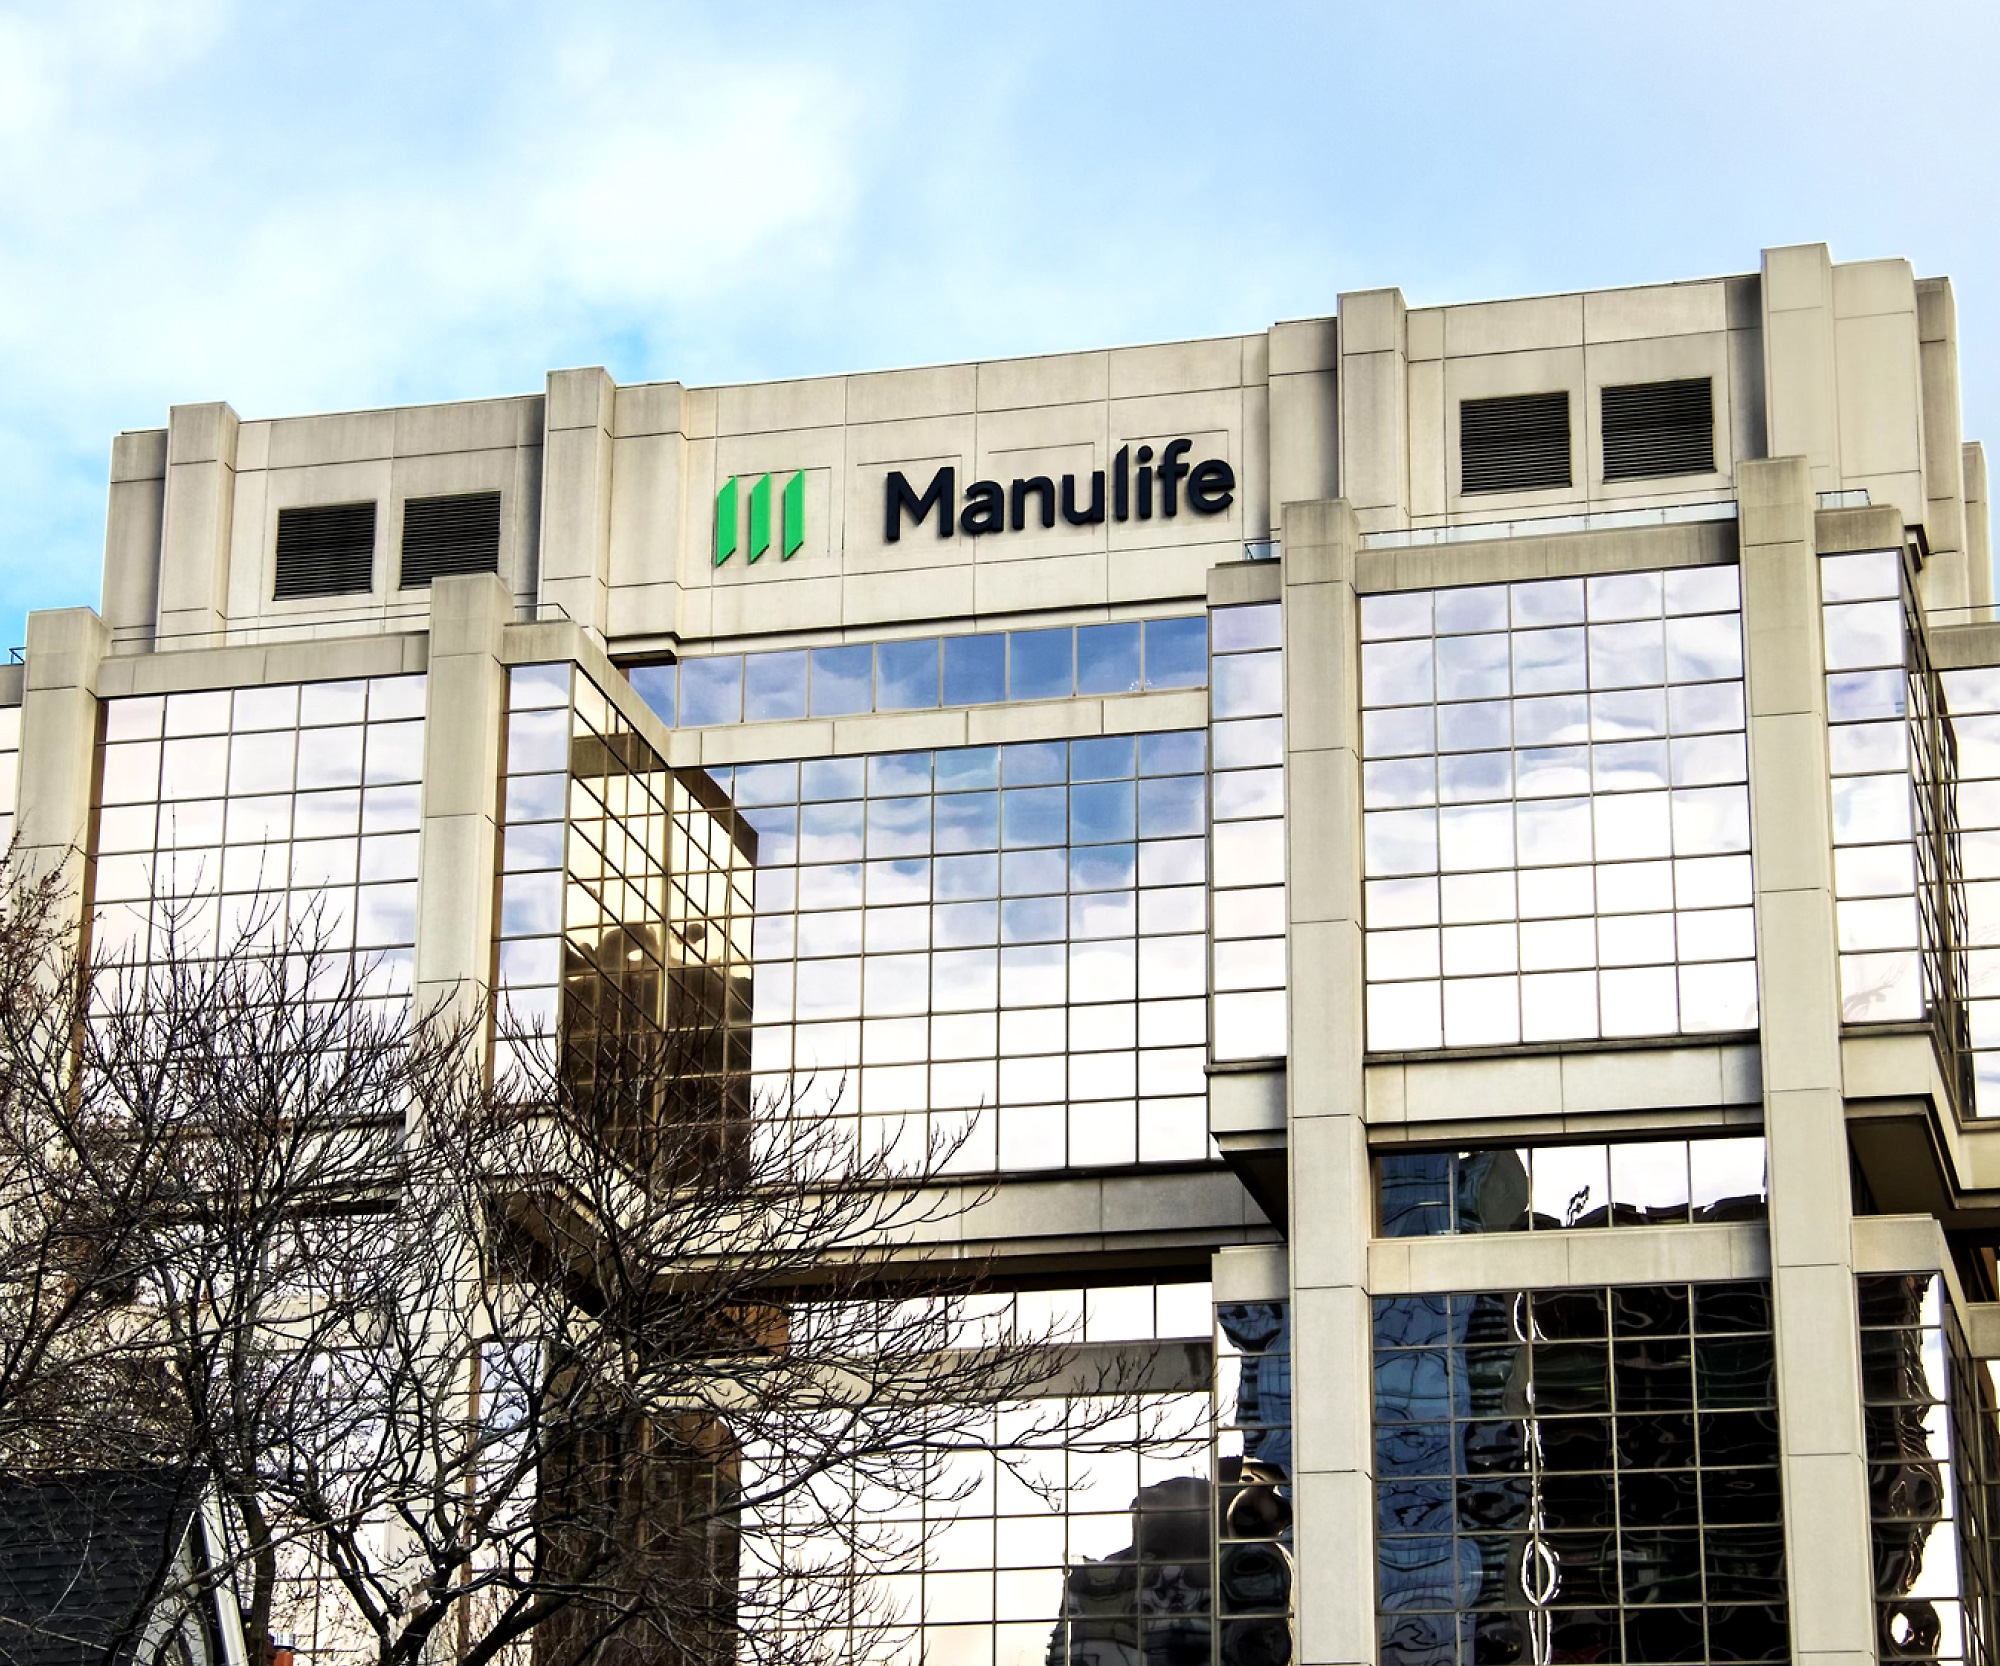 A building with a logo of Manulife on it